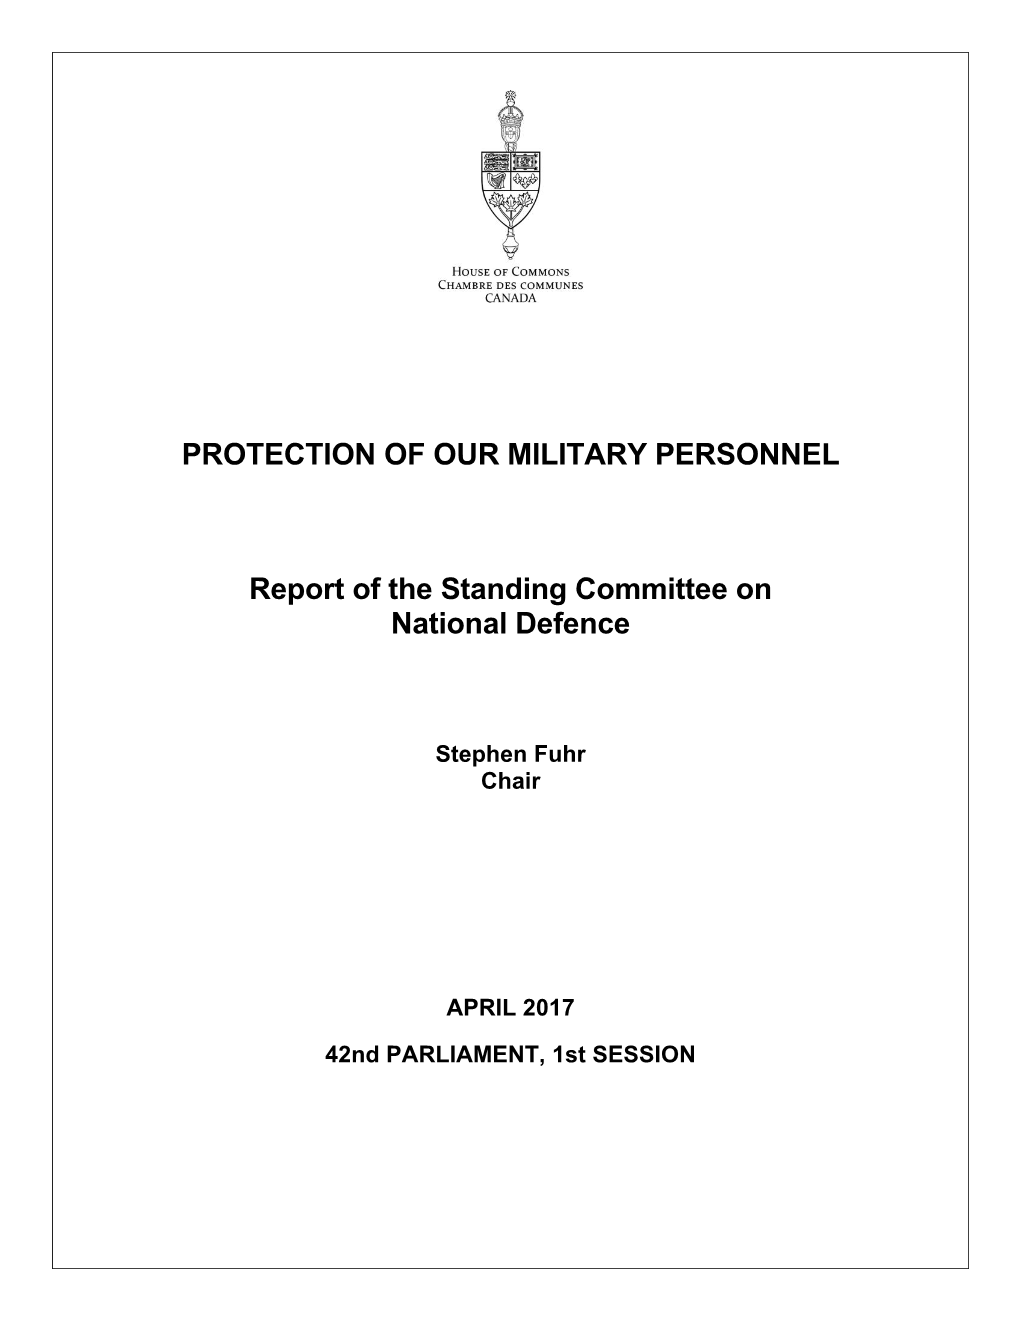 Protection of Our Military Personnel